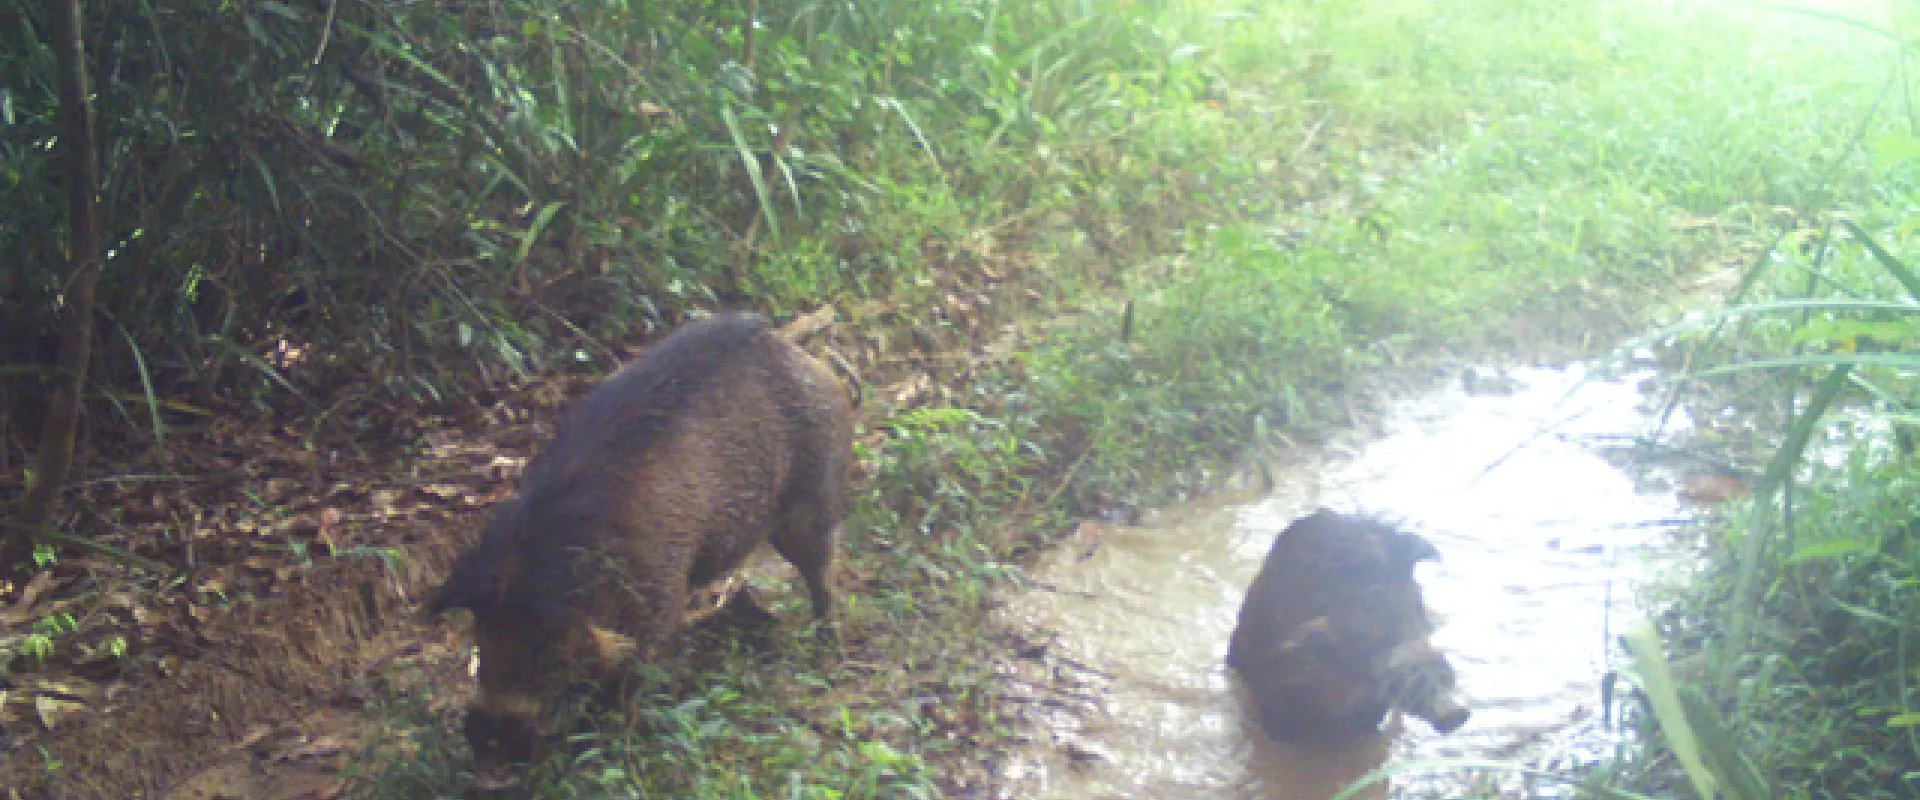 North Carolina Zoo Supports the Reintroduction of Visayan Warty Pigs Back Into the Wild